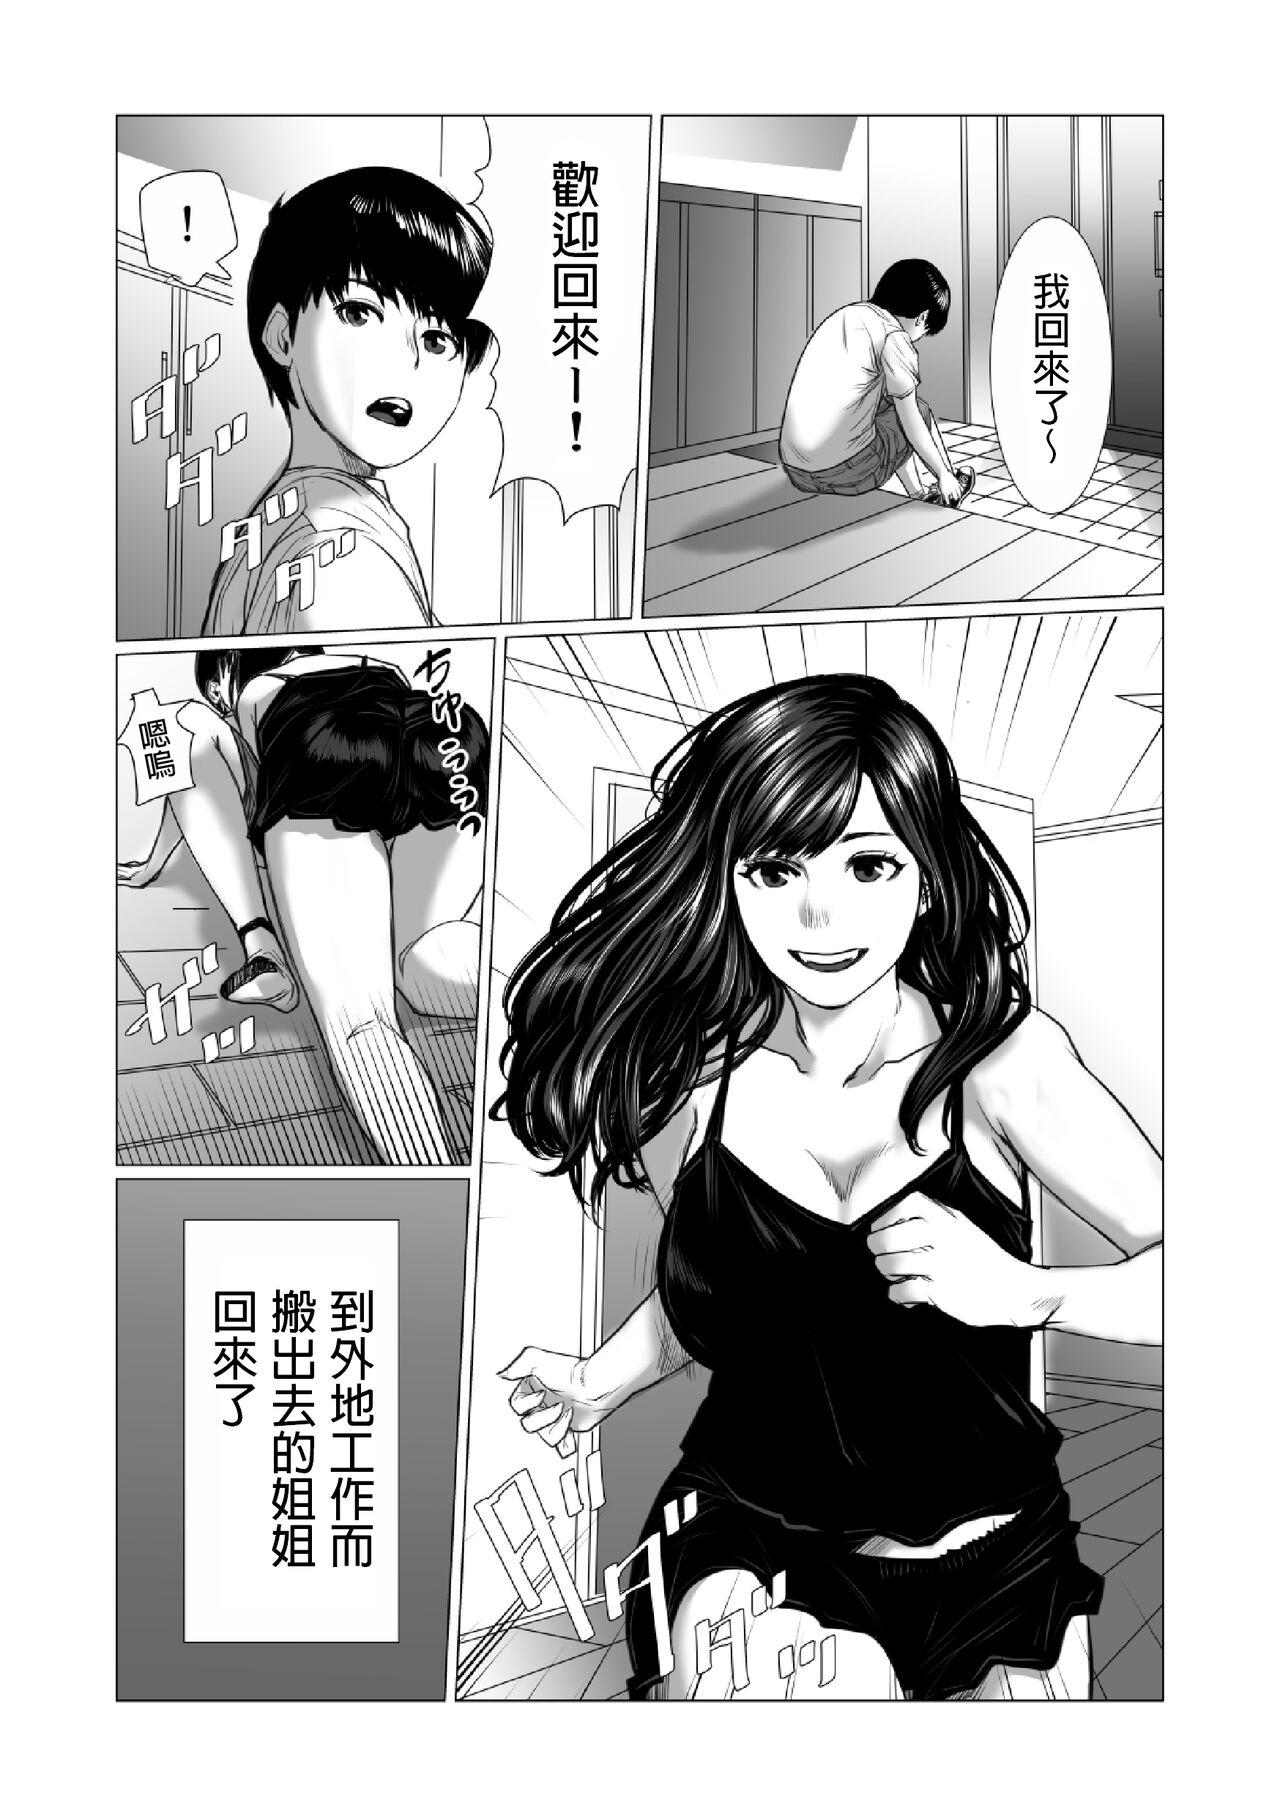 Exposed 弟のゲーム脳と姉のゲーム性 中文翻譯 - Original Monster Cock - Page 2